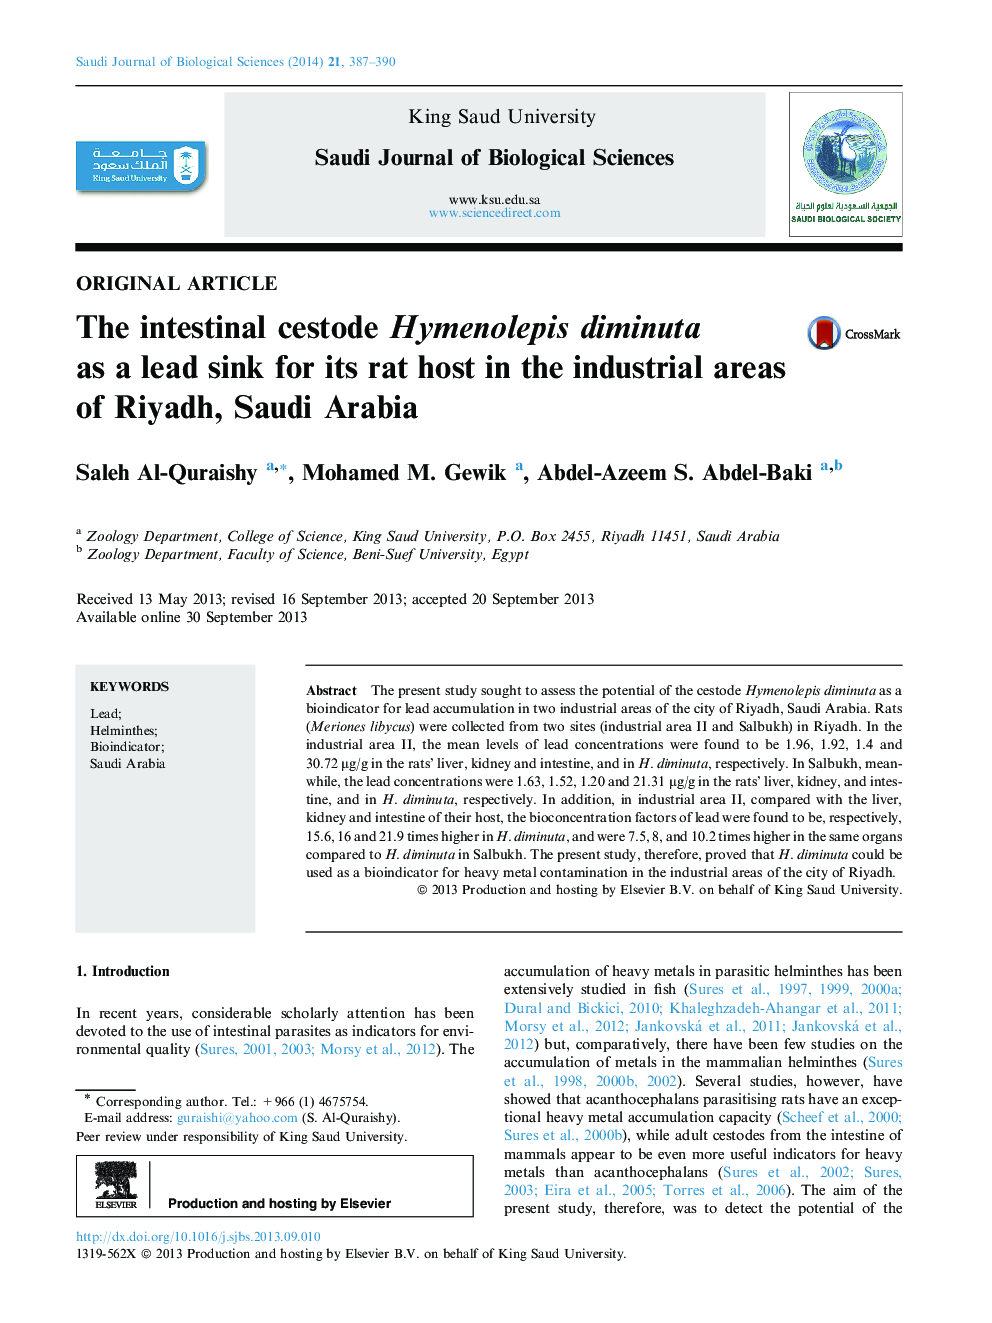 The intestinal cestode Hymenolepis diminuta as a lead sink for its rat host in the industrial areas of Riyadh, Saudi Arabia 